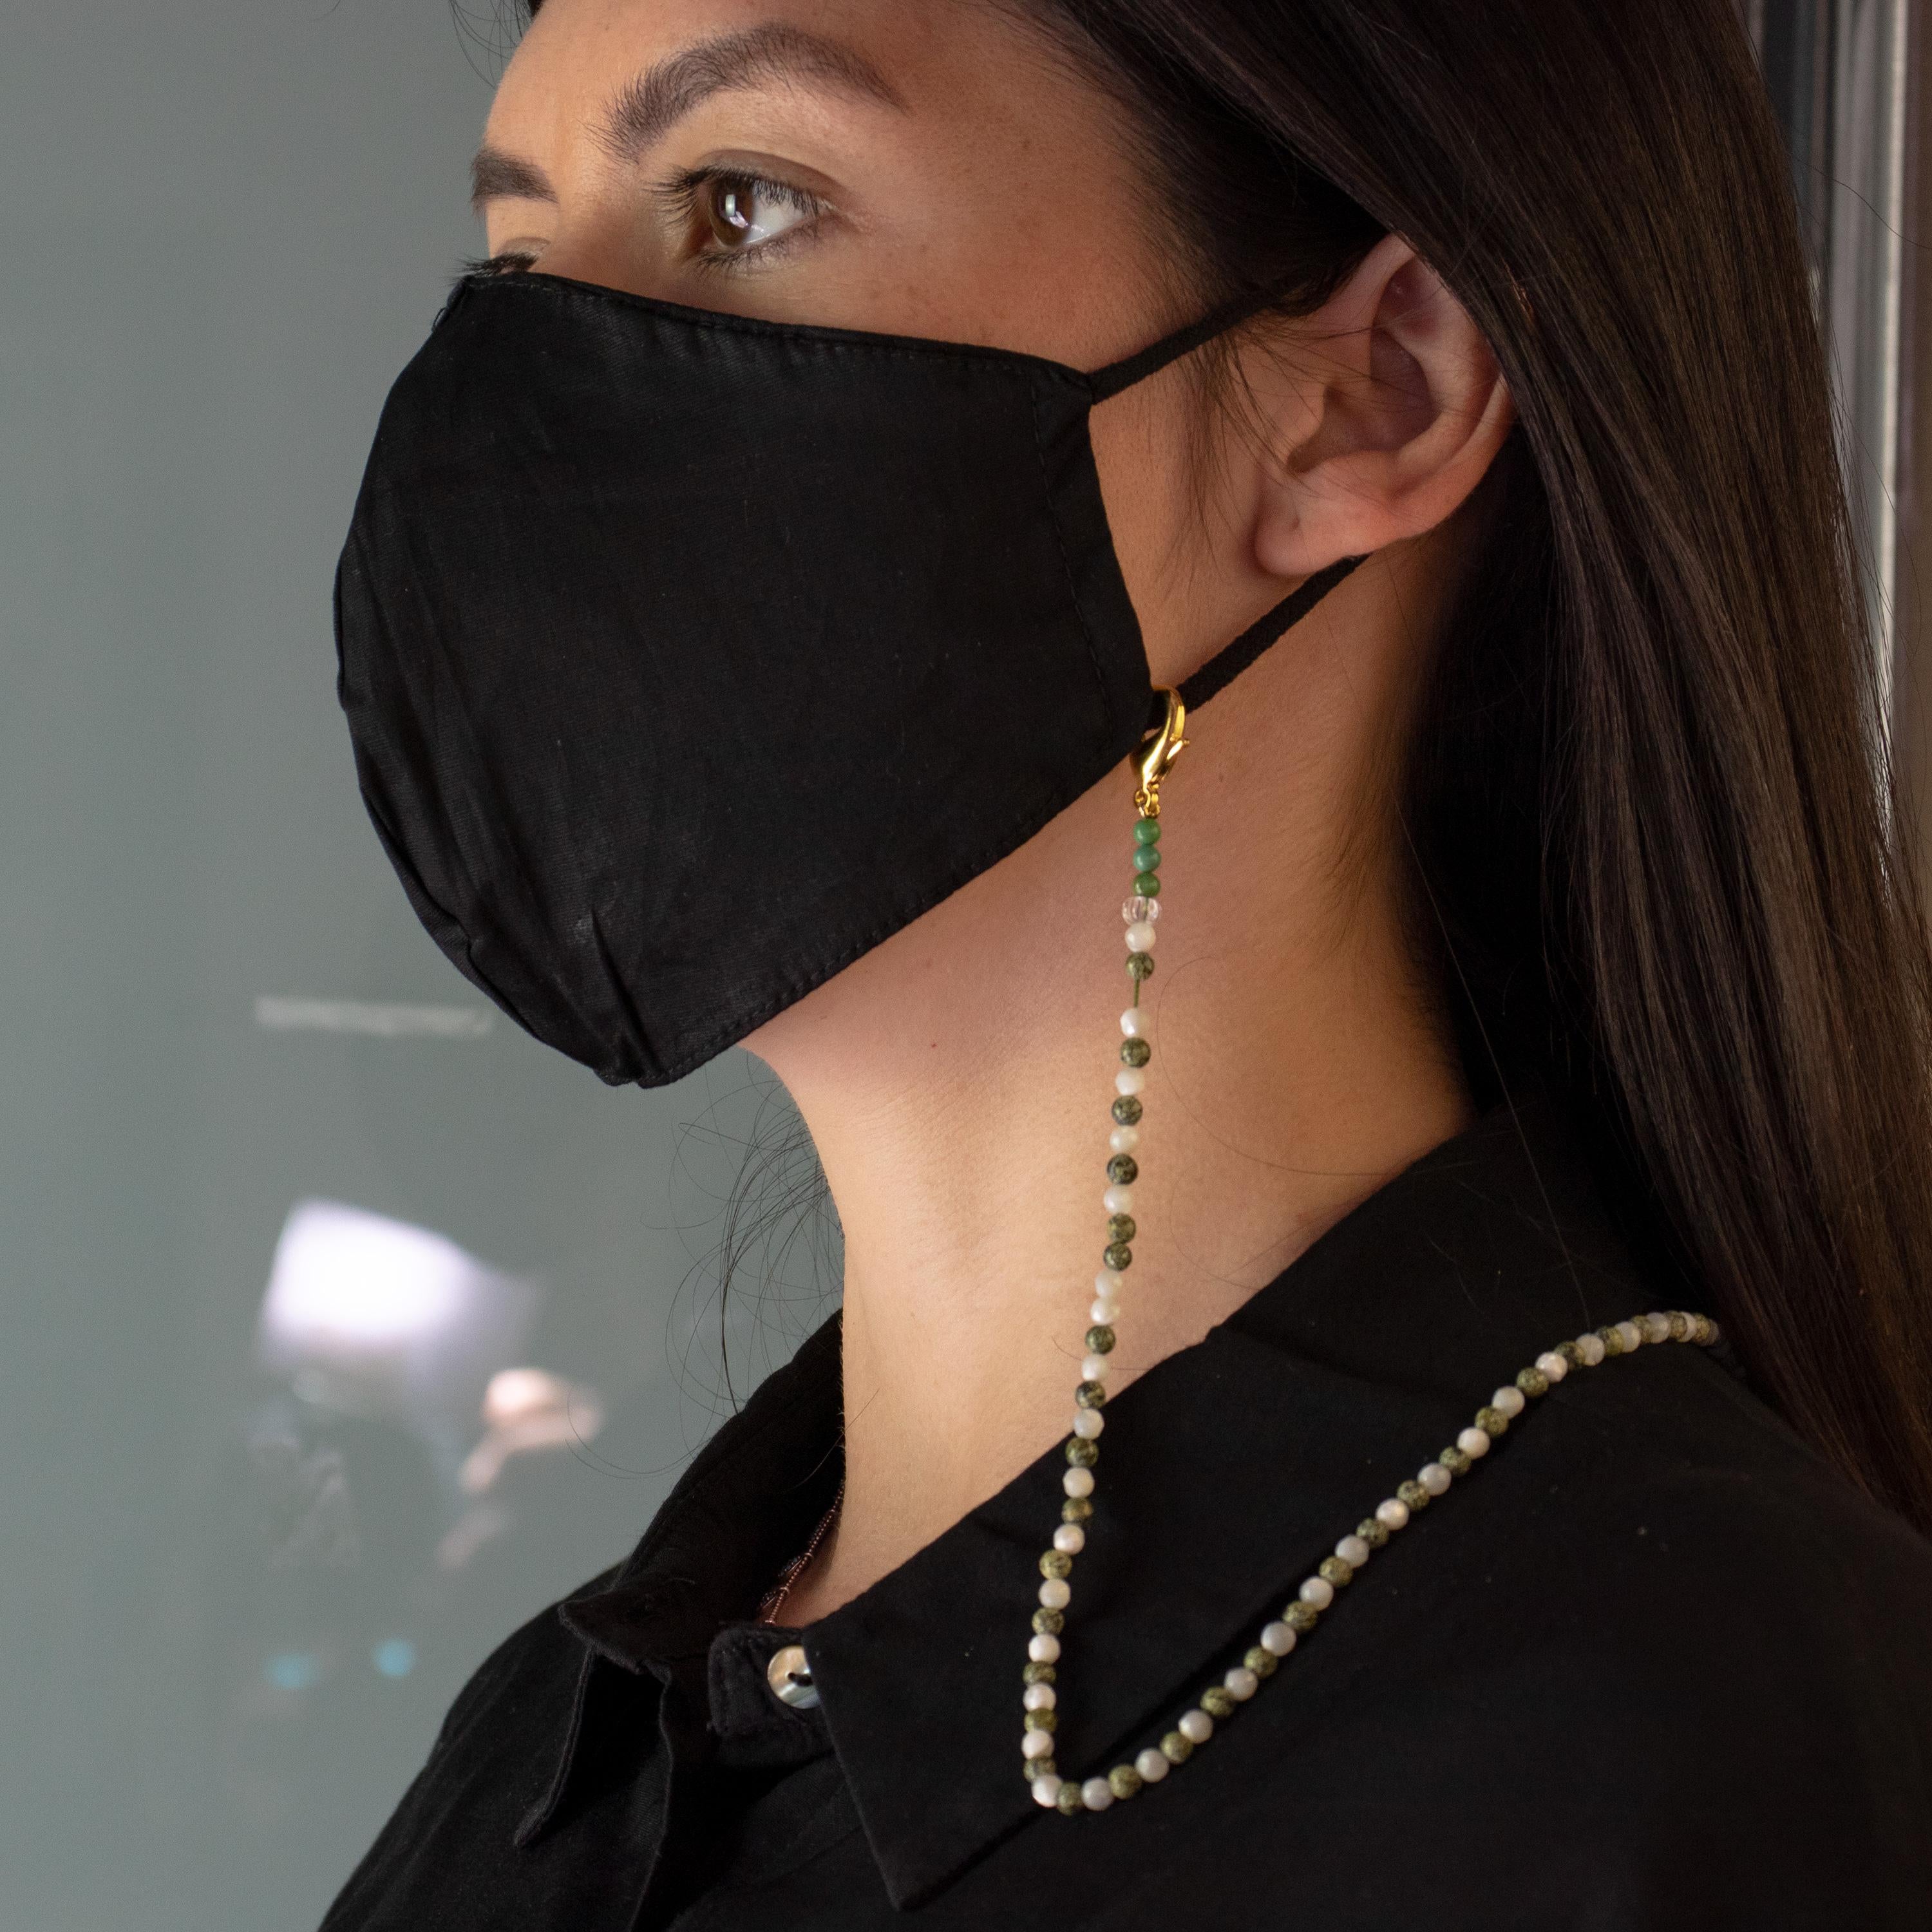 Now face masks are part of our daily necessities, carry yours whenever you want and wherever you go and avoid having your mask dangling off one ear or around your chin! Keep your mask close with this beaded chain and avoid putting it on the table or